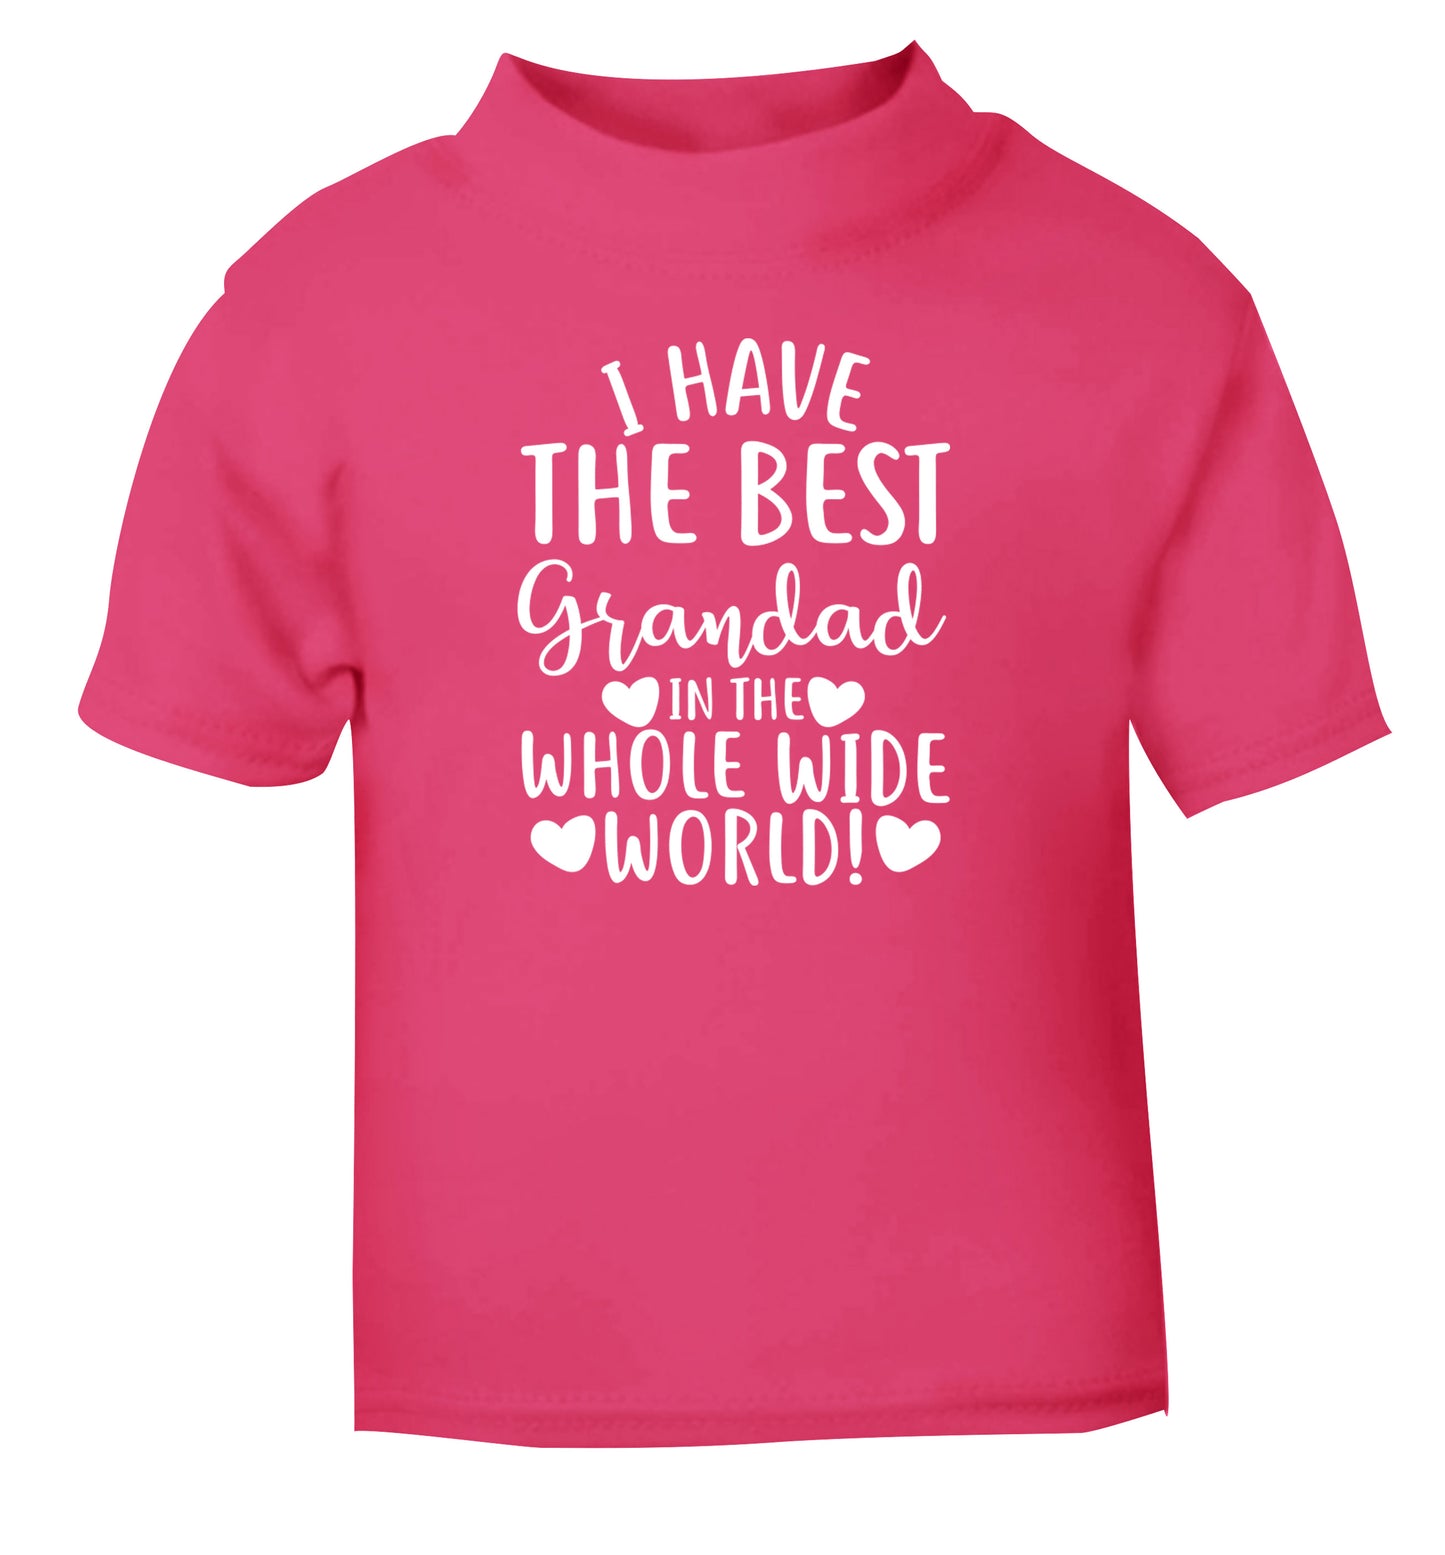 I have the best grandad in the whole wide world! pink Baby Toddler Tshirt 2 Years